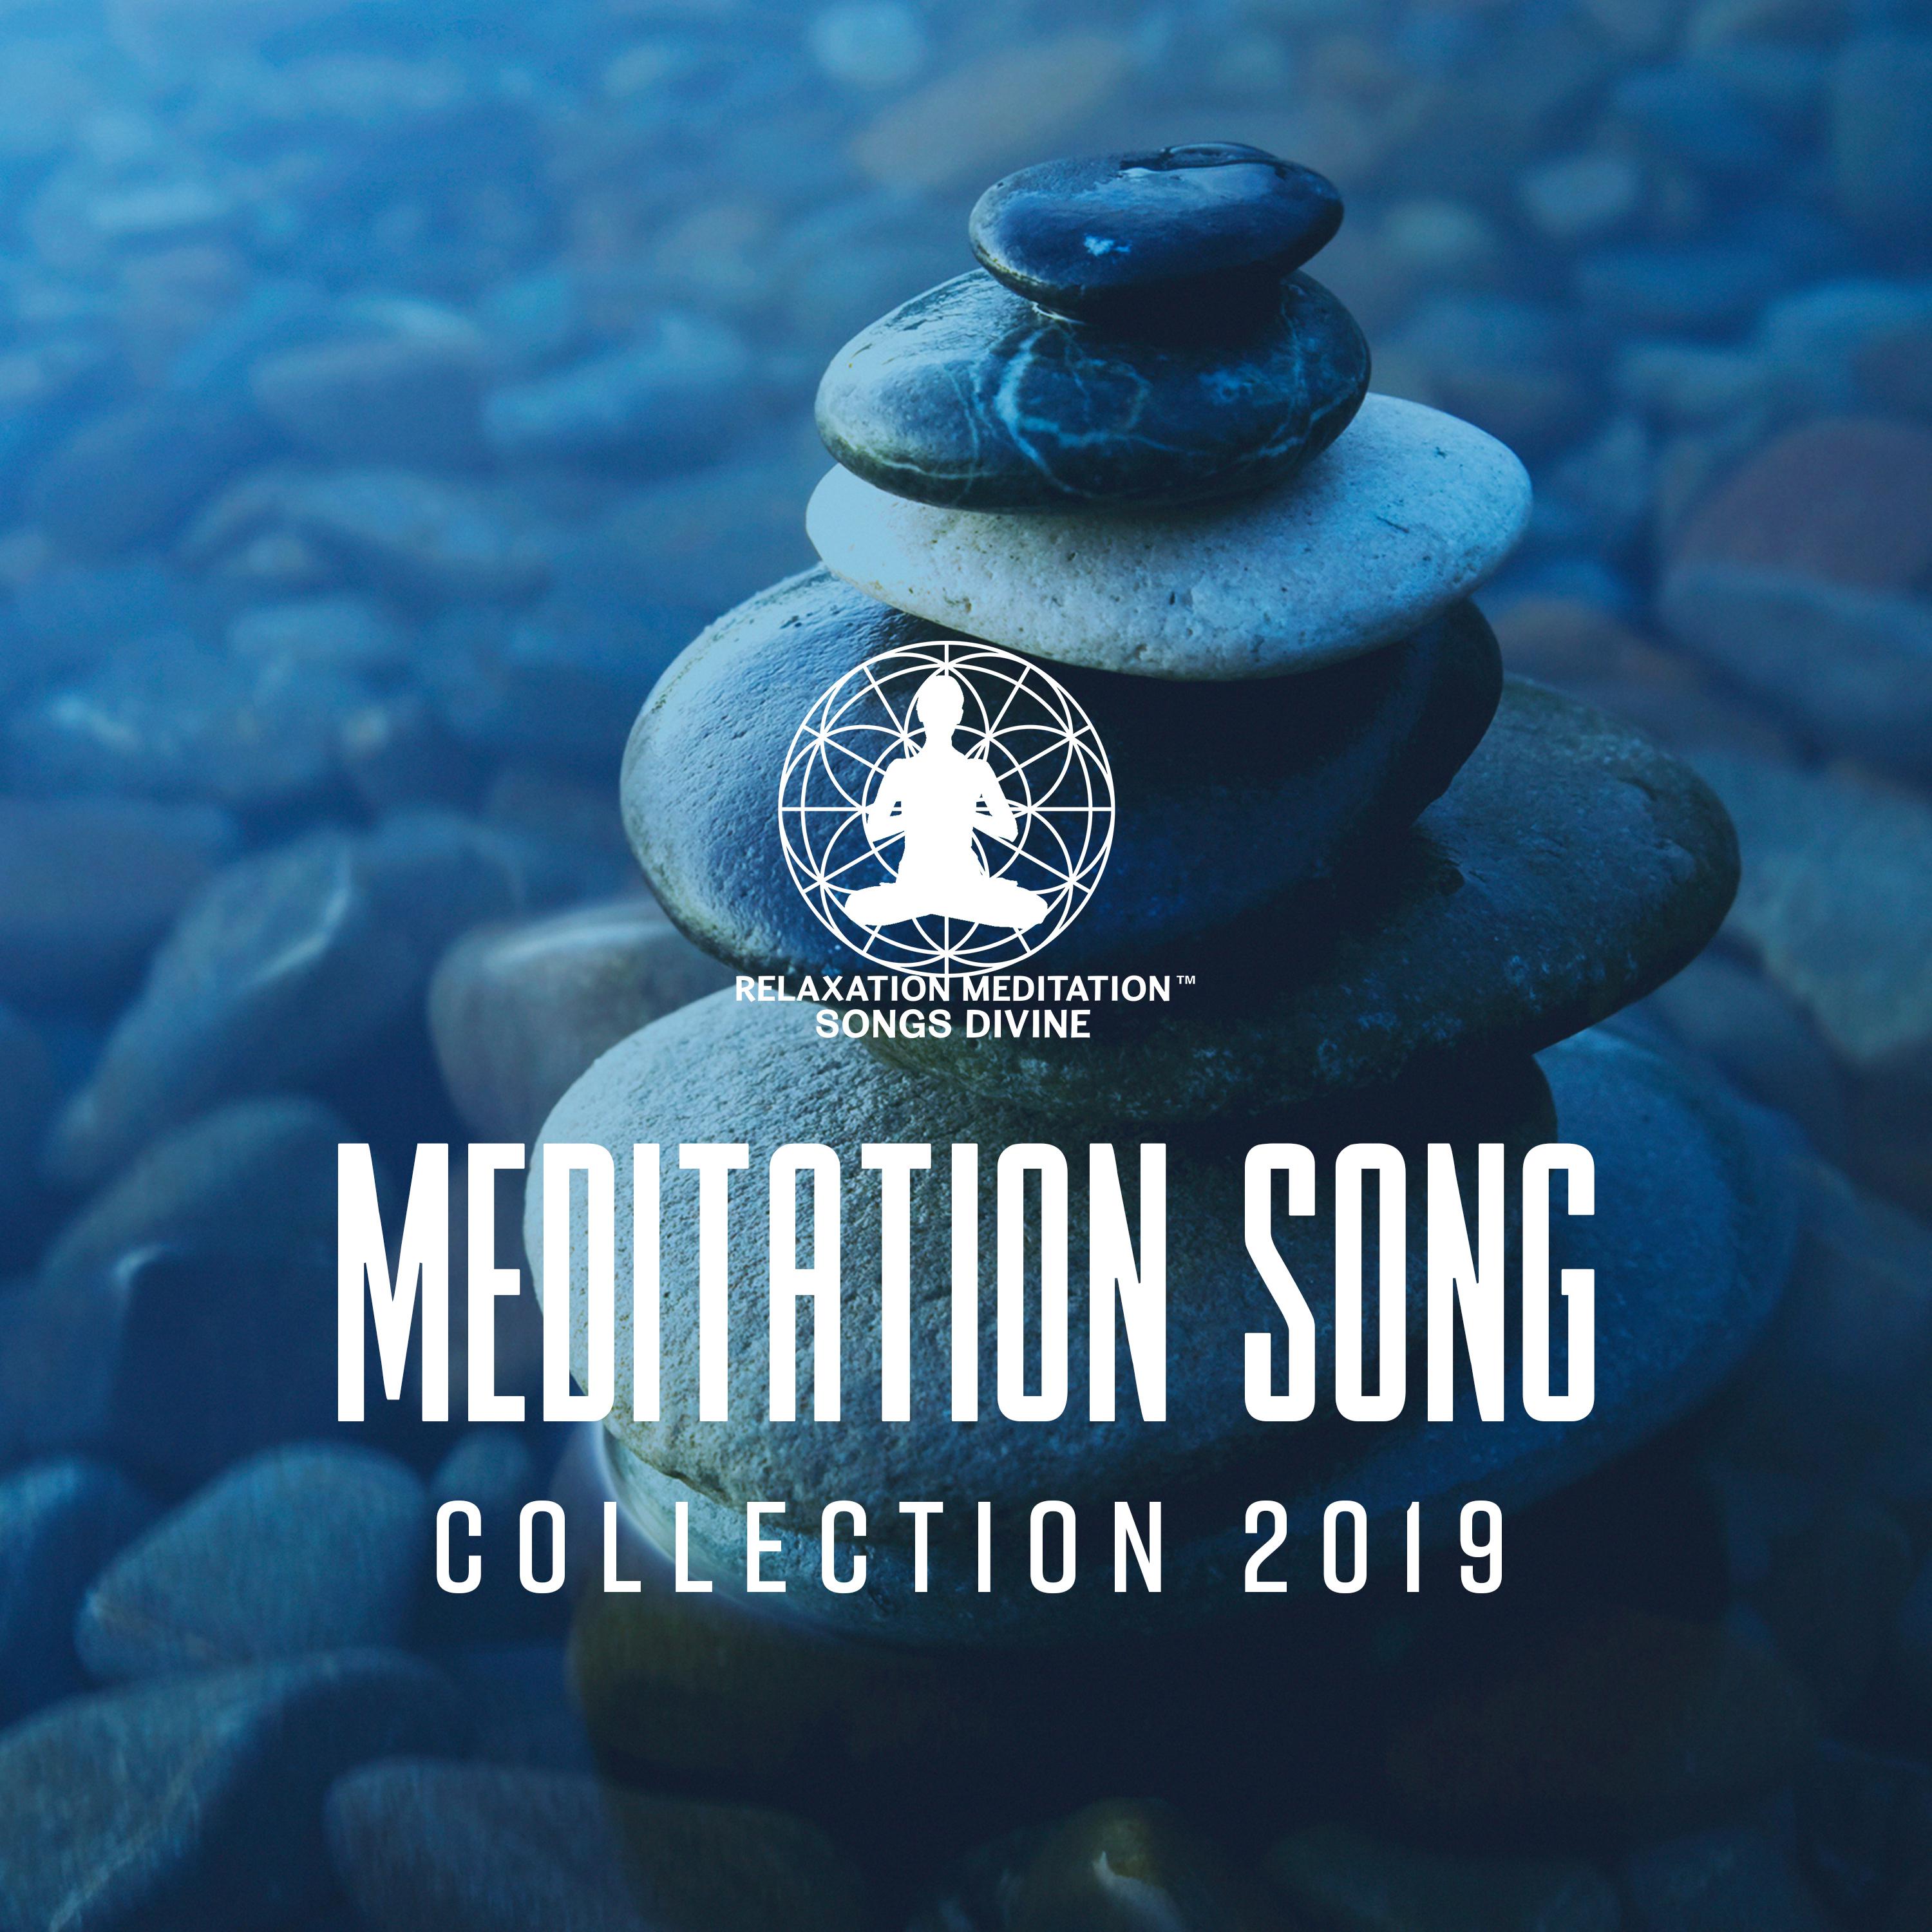 Meditation Song Collection 2019